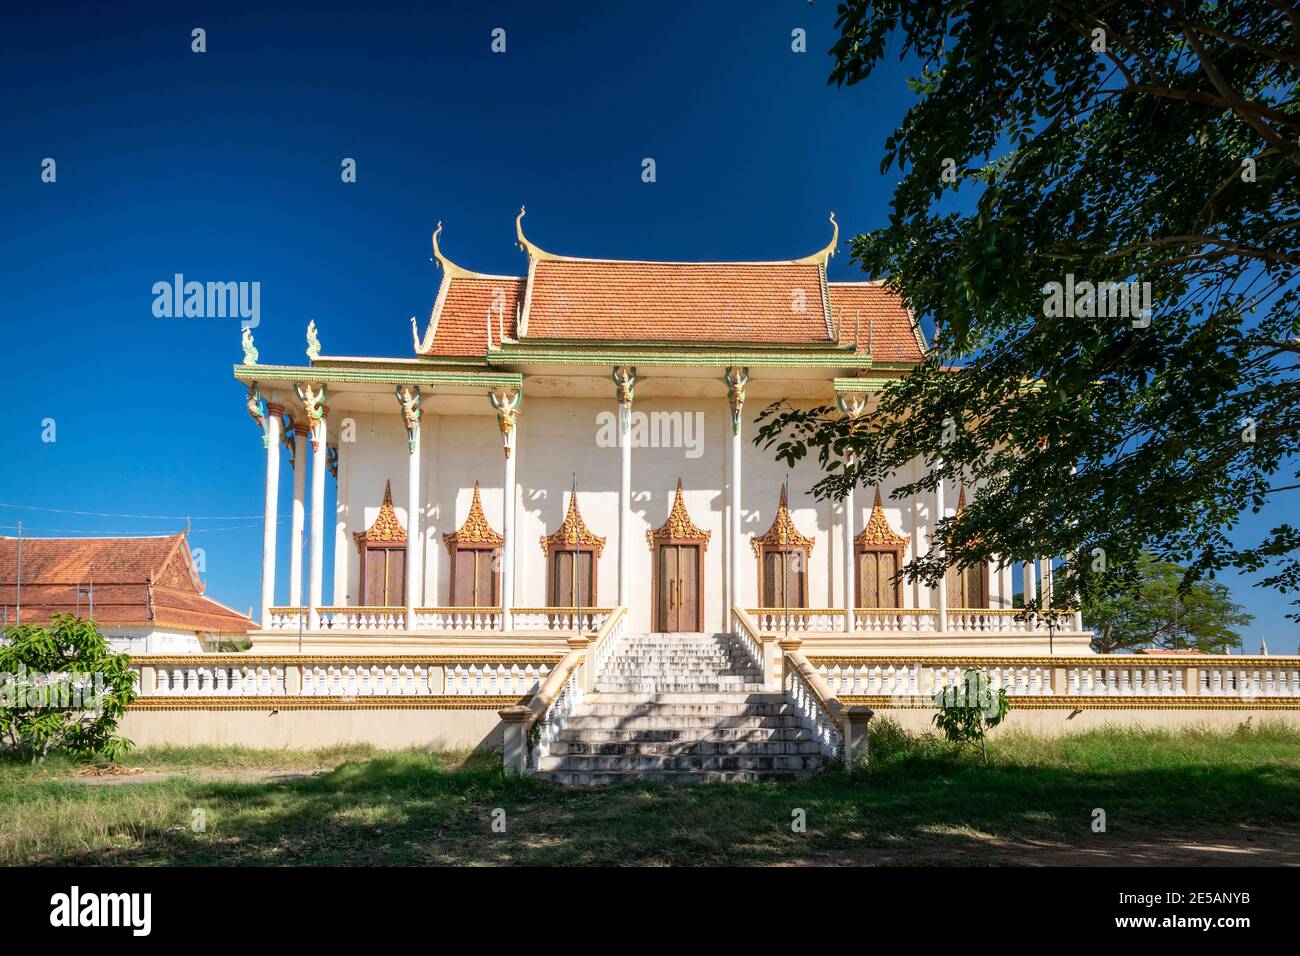 Wat Svay Andet Pagoda of Lakhon Khol Dance Unesco Intangible Cultural Heritage site in Kandal province near Phnom Penh Cambodia Stock Photo